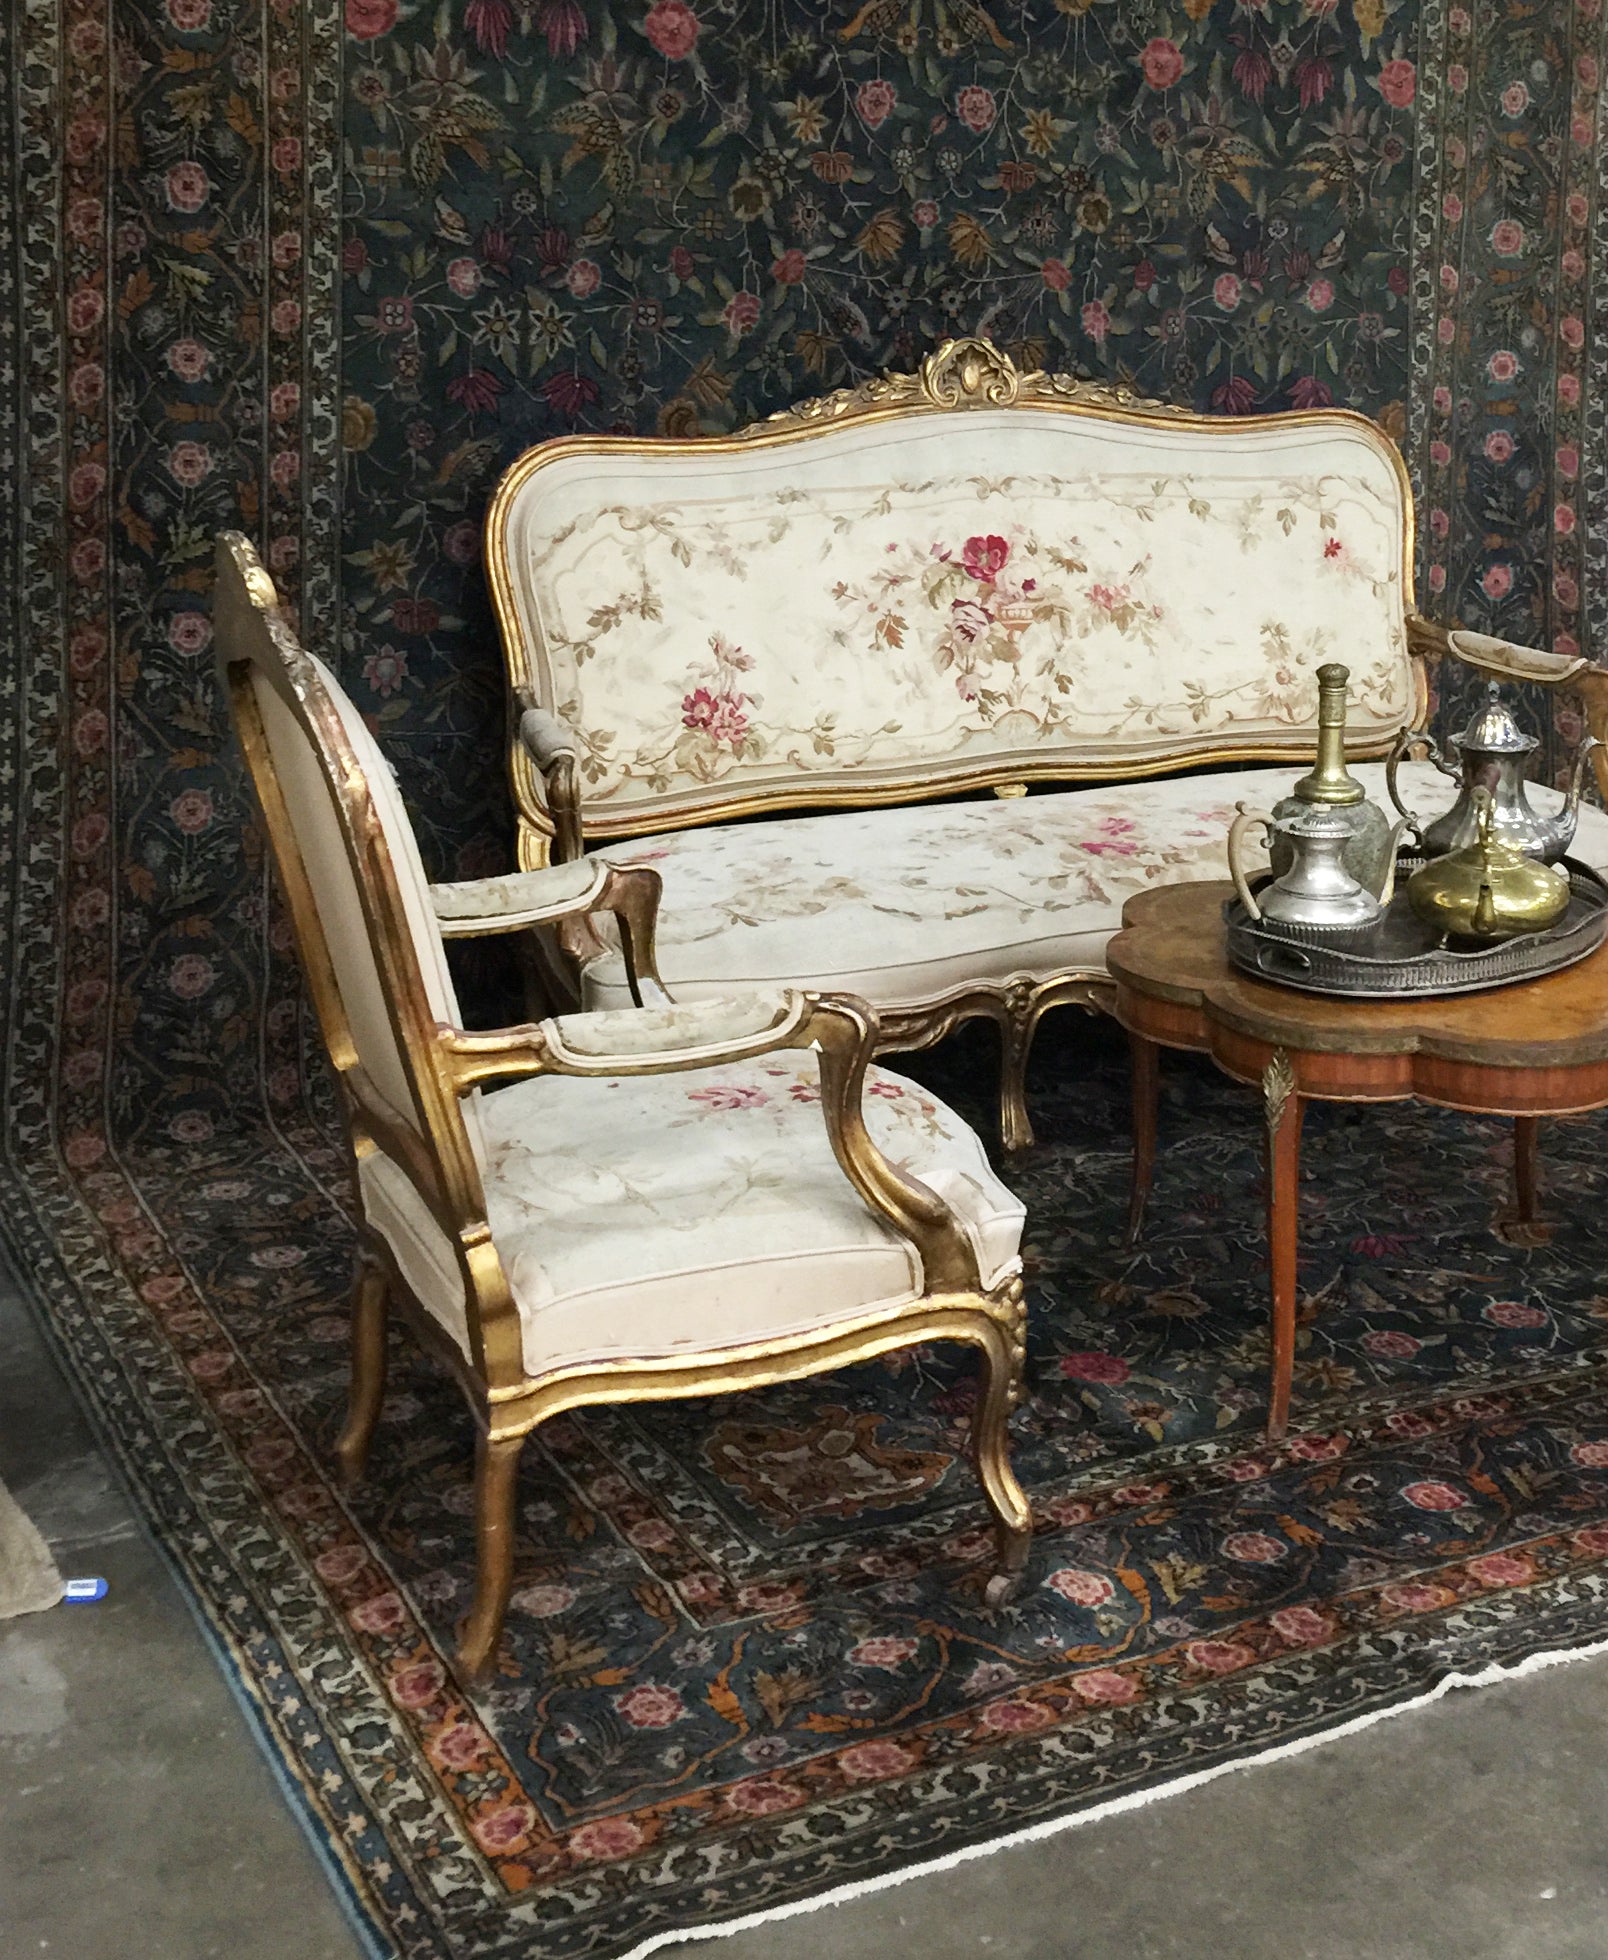 Take a timeless, bespoke design, mix in a dash of romantic connotations to get this worn-in bucolic charm aesthetic. Invite the beauty of Louis XV style into your home with this Giltwood Aubusson Tapestry three piece salon suite from the French